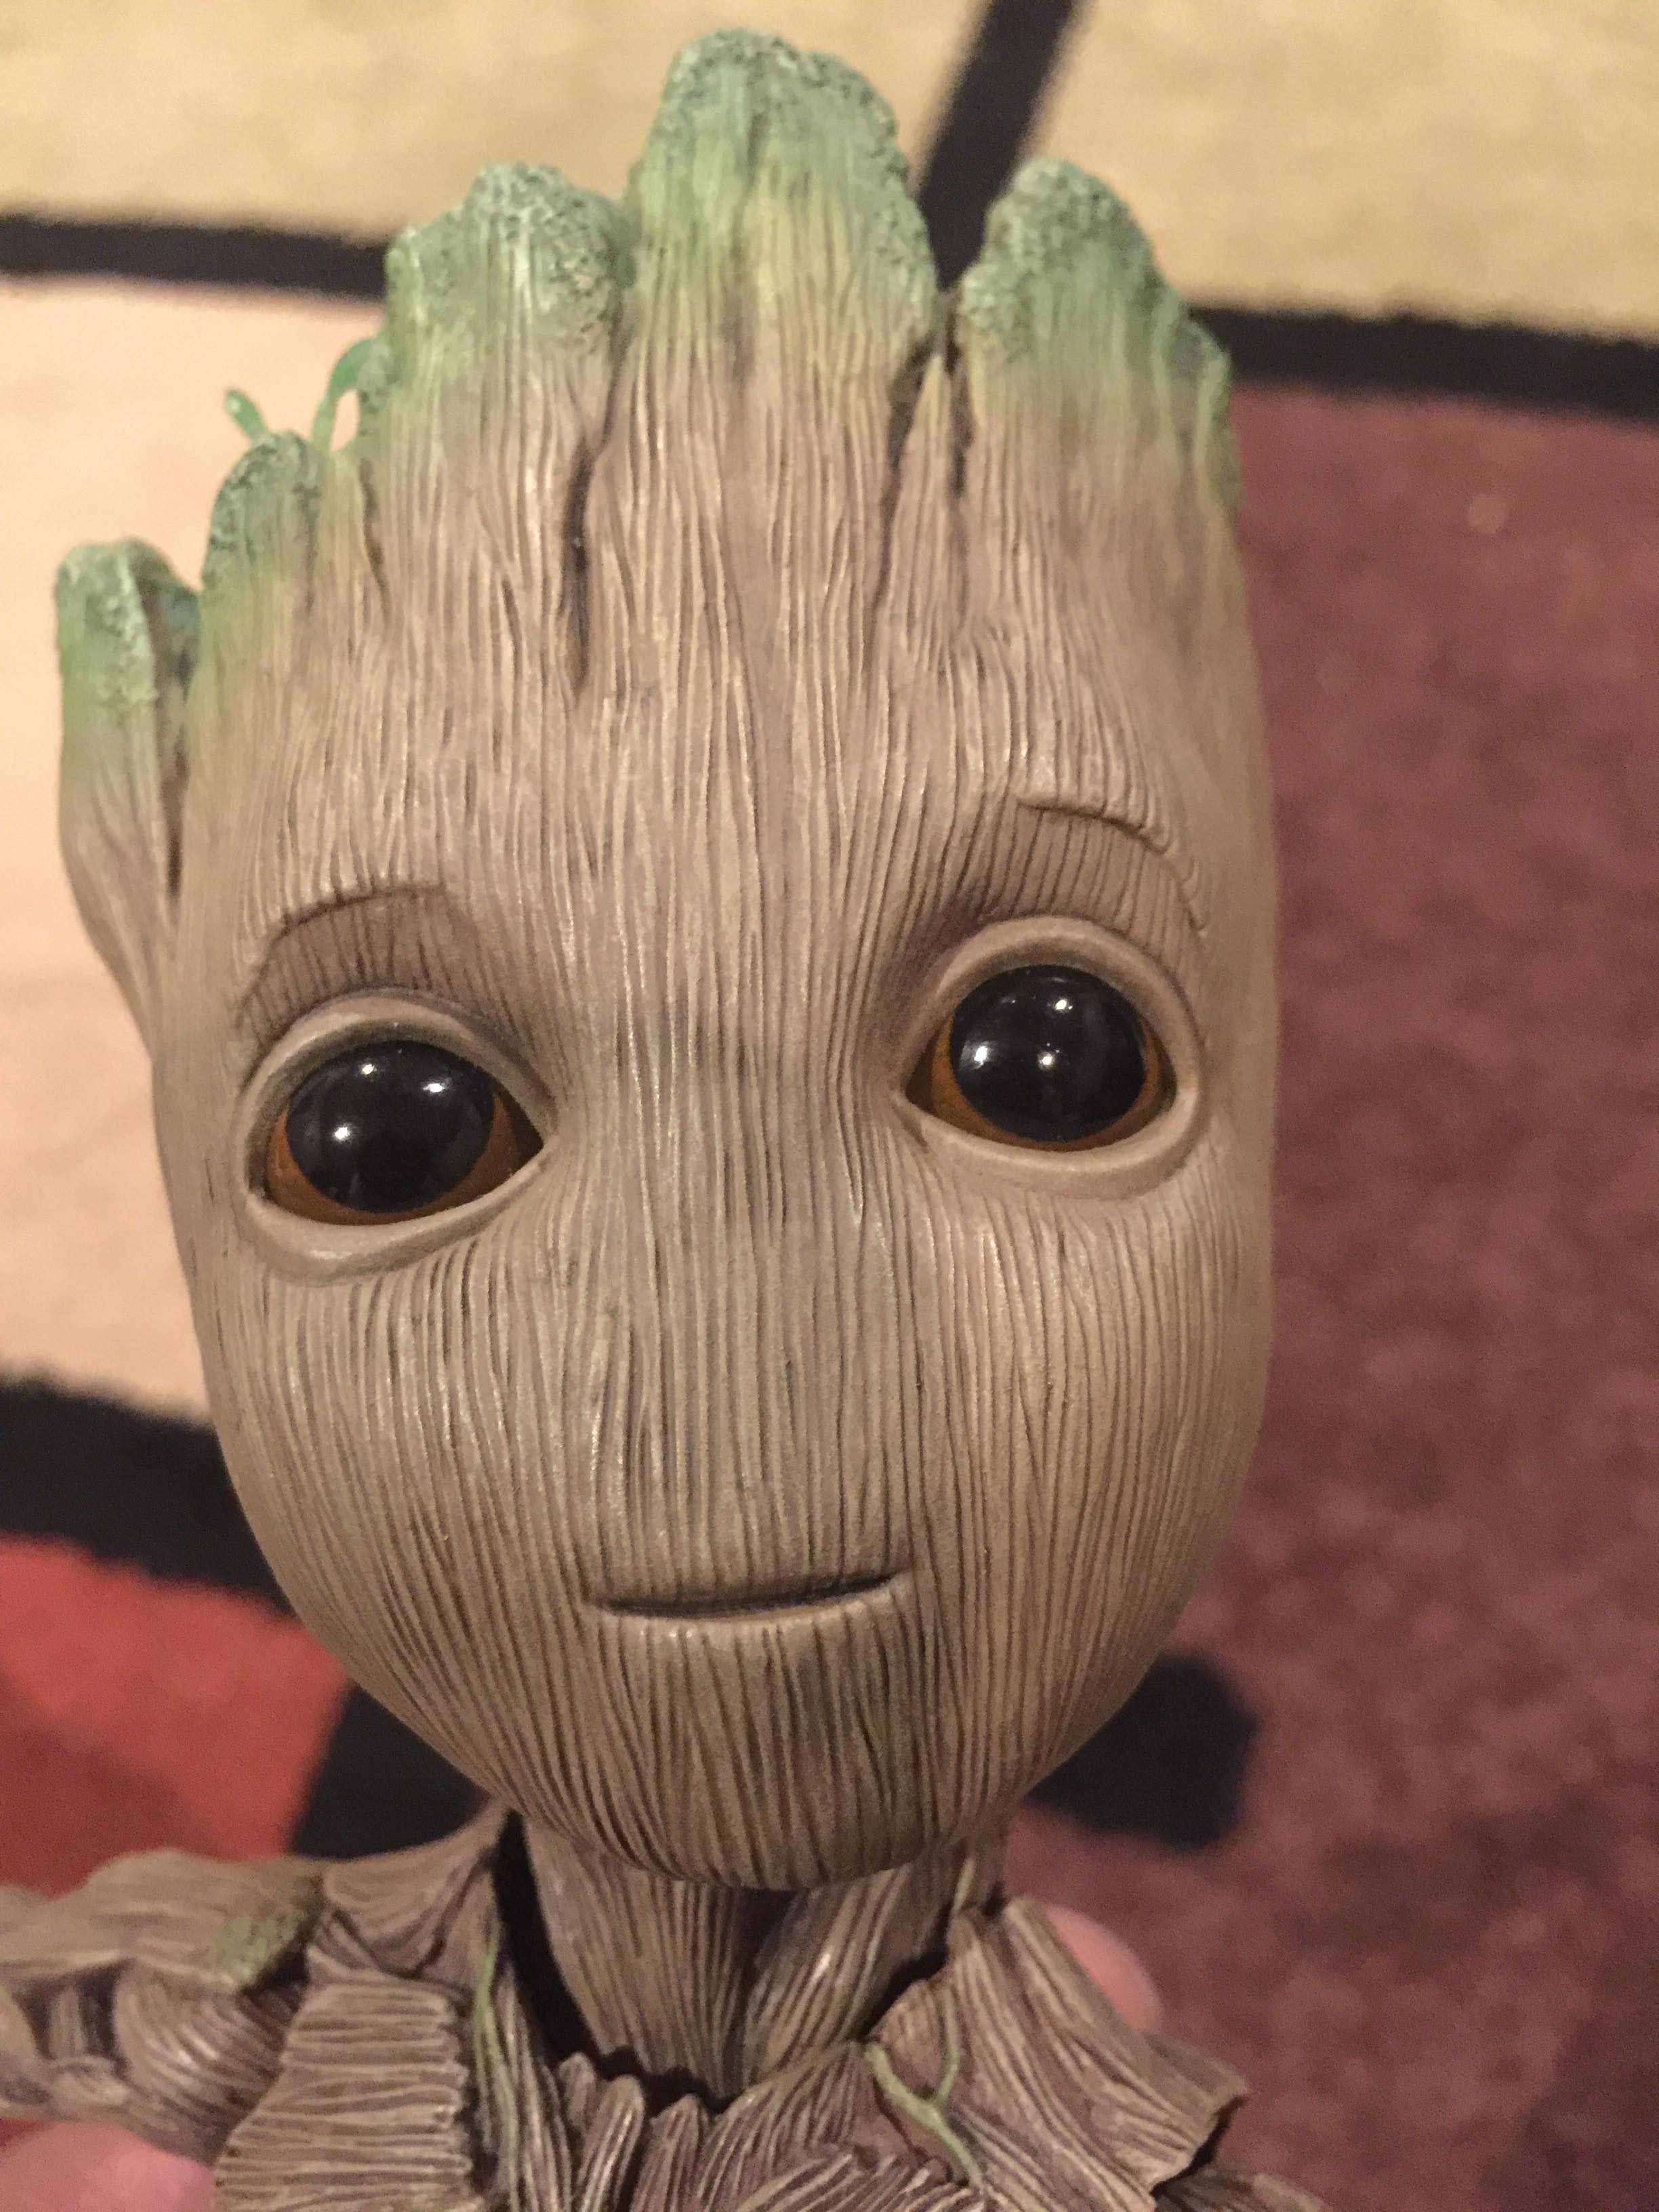 hot-toys-life-size-baby-groot-figure-review-photos-marvel-toy-news